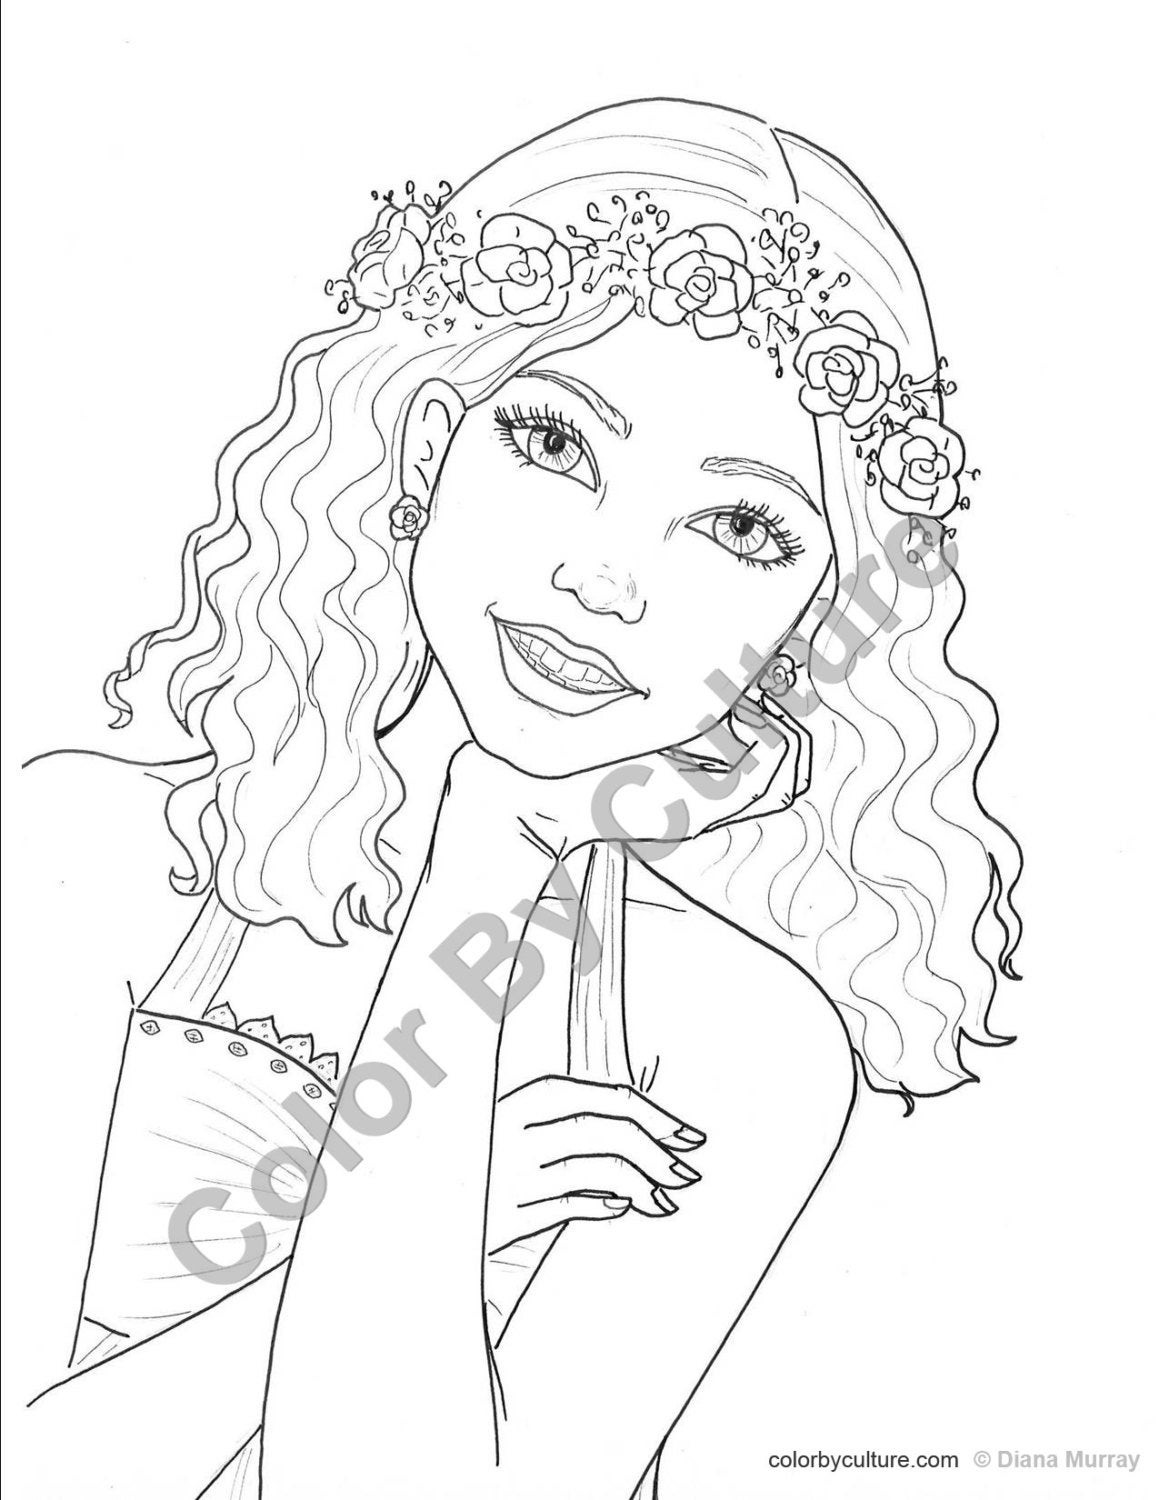 Coloring Pages Of Girls For Adults
 Fashion Coloring Page Girl with Flower Wreath Coloring Page